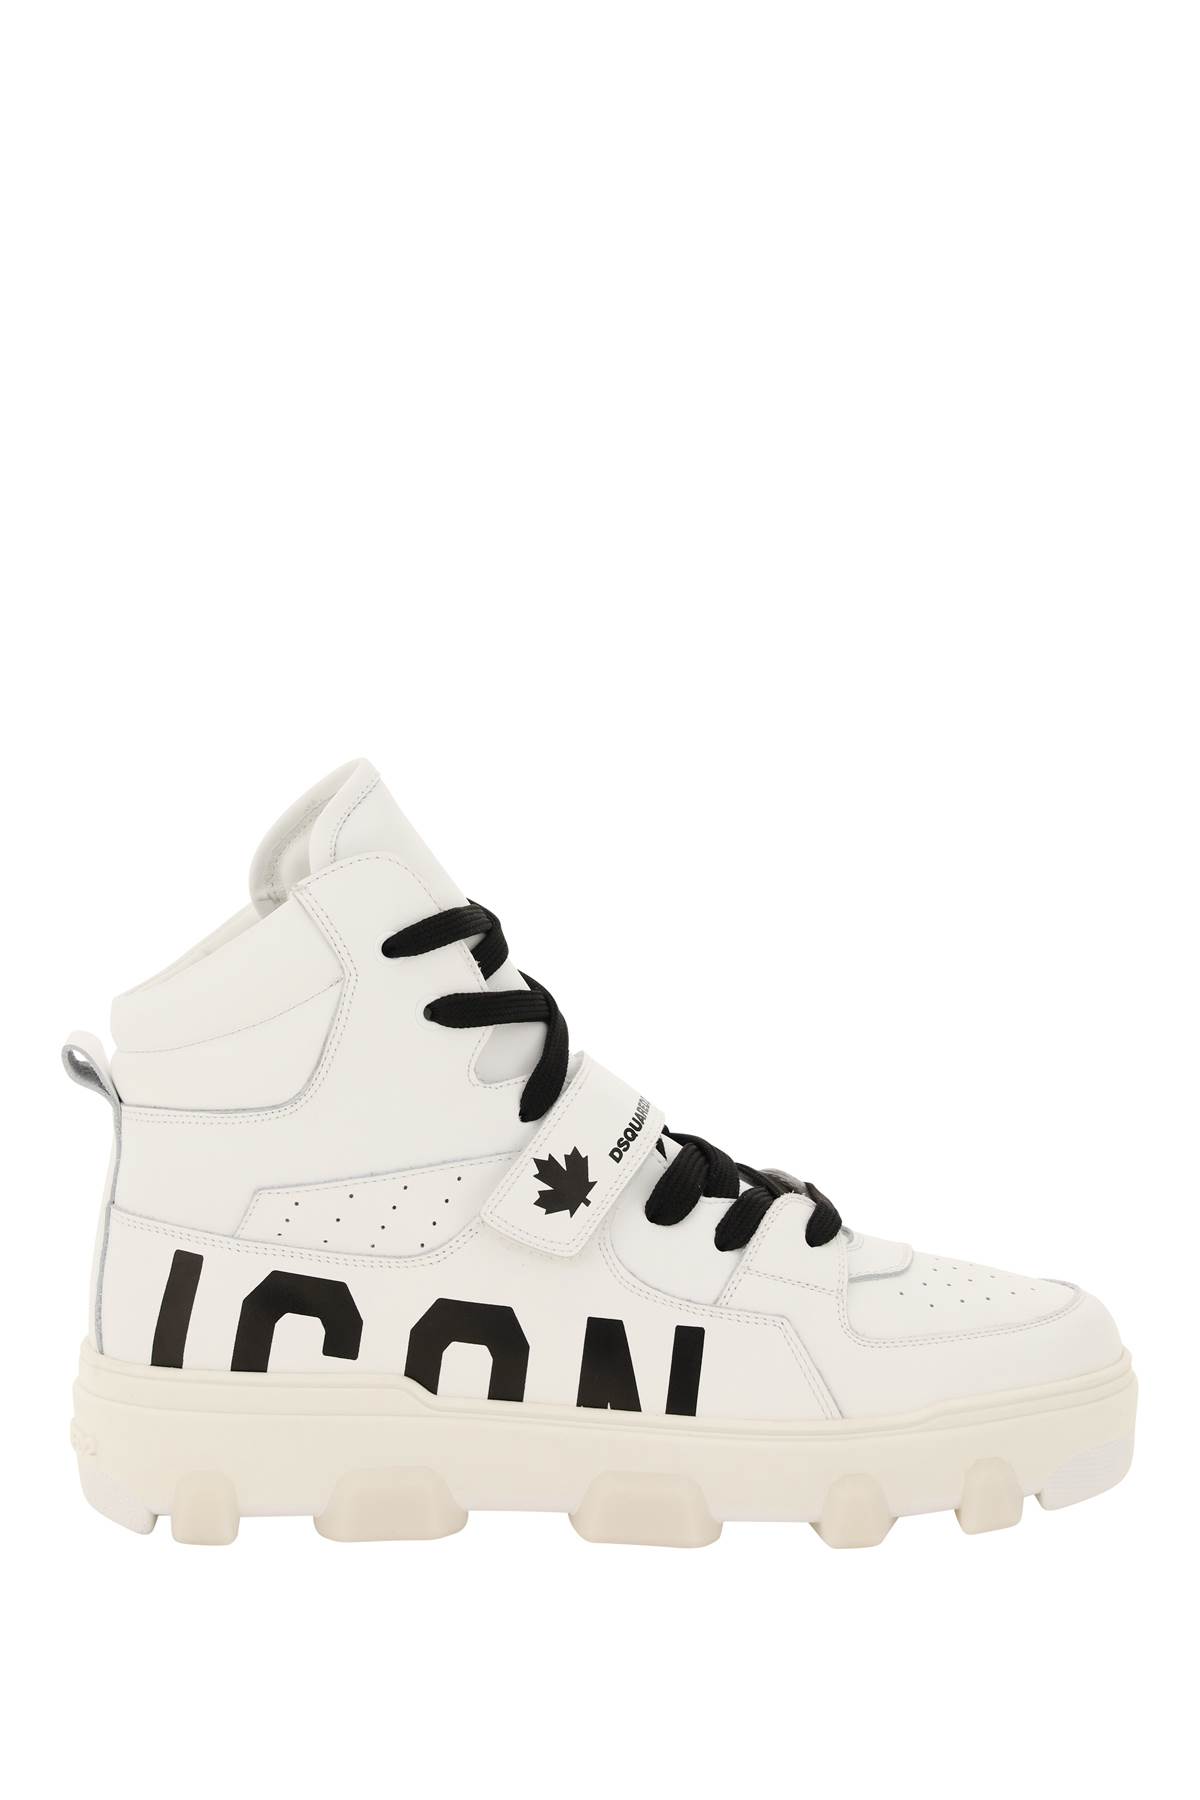 Dsquared2 Basket Icon Hi-top Sneakers | italist, ALWAYS LIKE A 